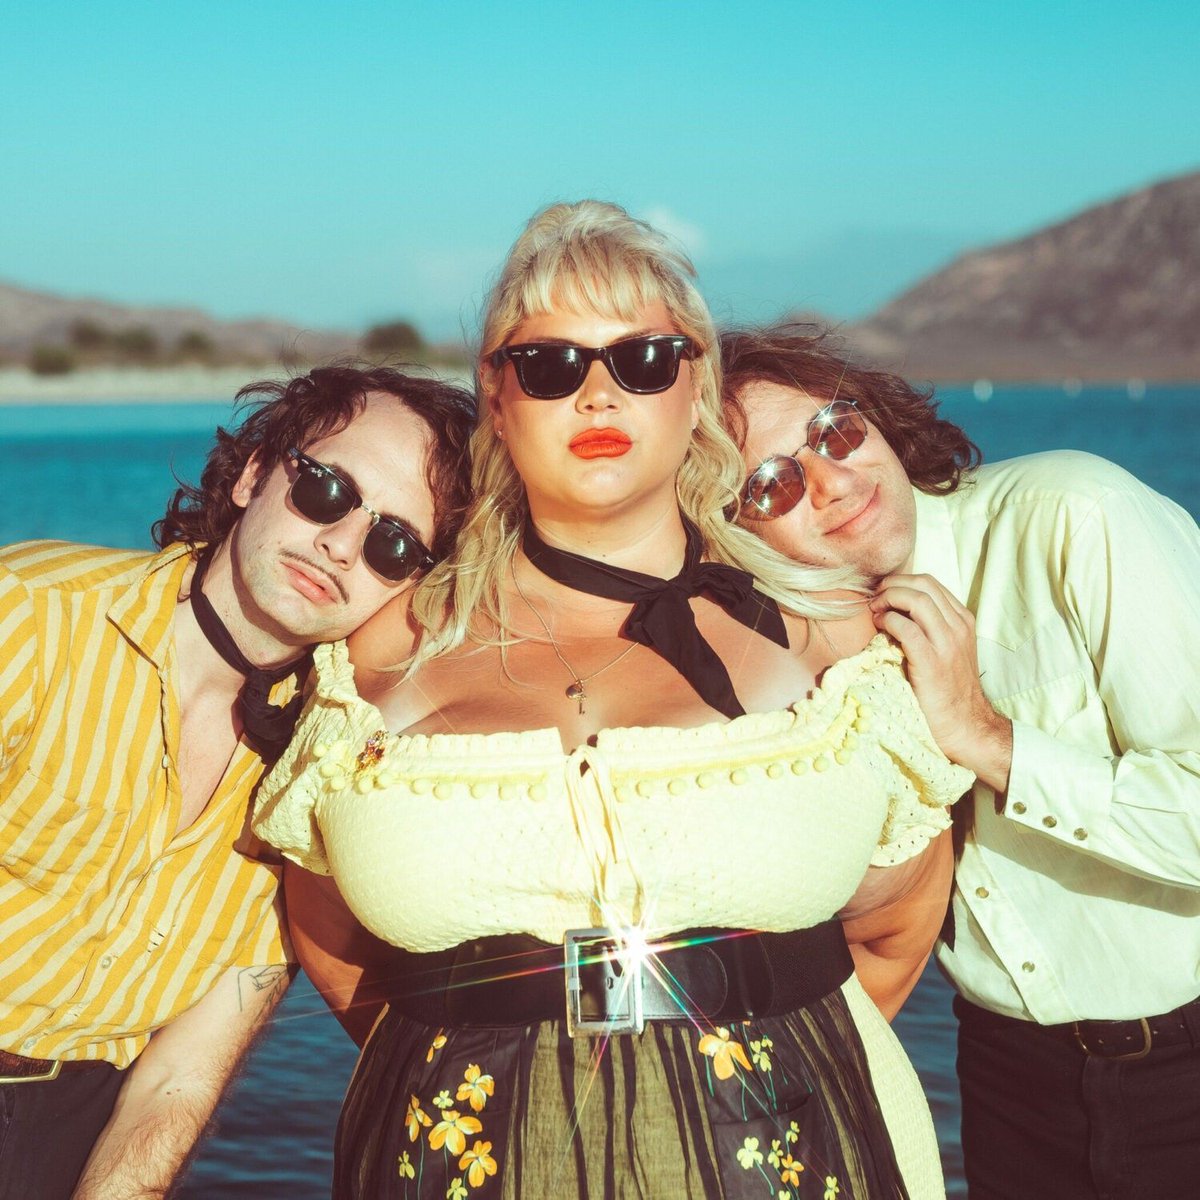 Now Playing: 'The Moon is in the Wrong Place' by LOCALS @ShanAndTheClams

This band with Oakland roots is putting out a brand new record 5/10 via @EasyEyeSound

You can see their home-coming show 10/19 at @FOXOakland

#NP on @live105fm’s SOUNDCHECK with DJ @AaronAxelsen